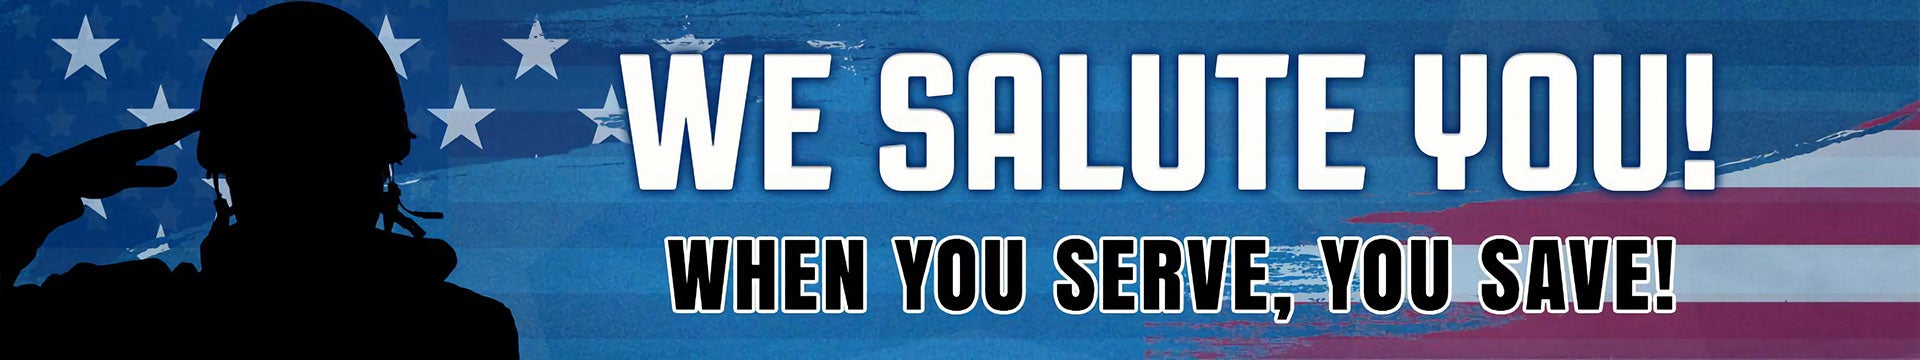 We Salue You! When You Serve, You Save!